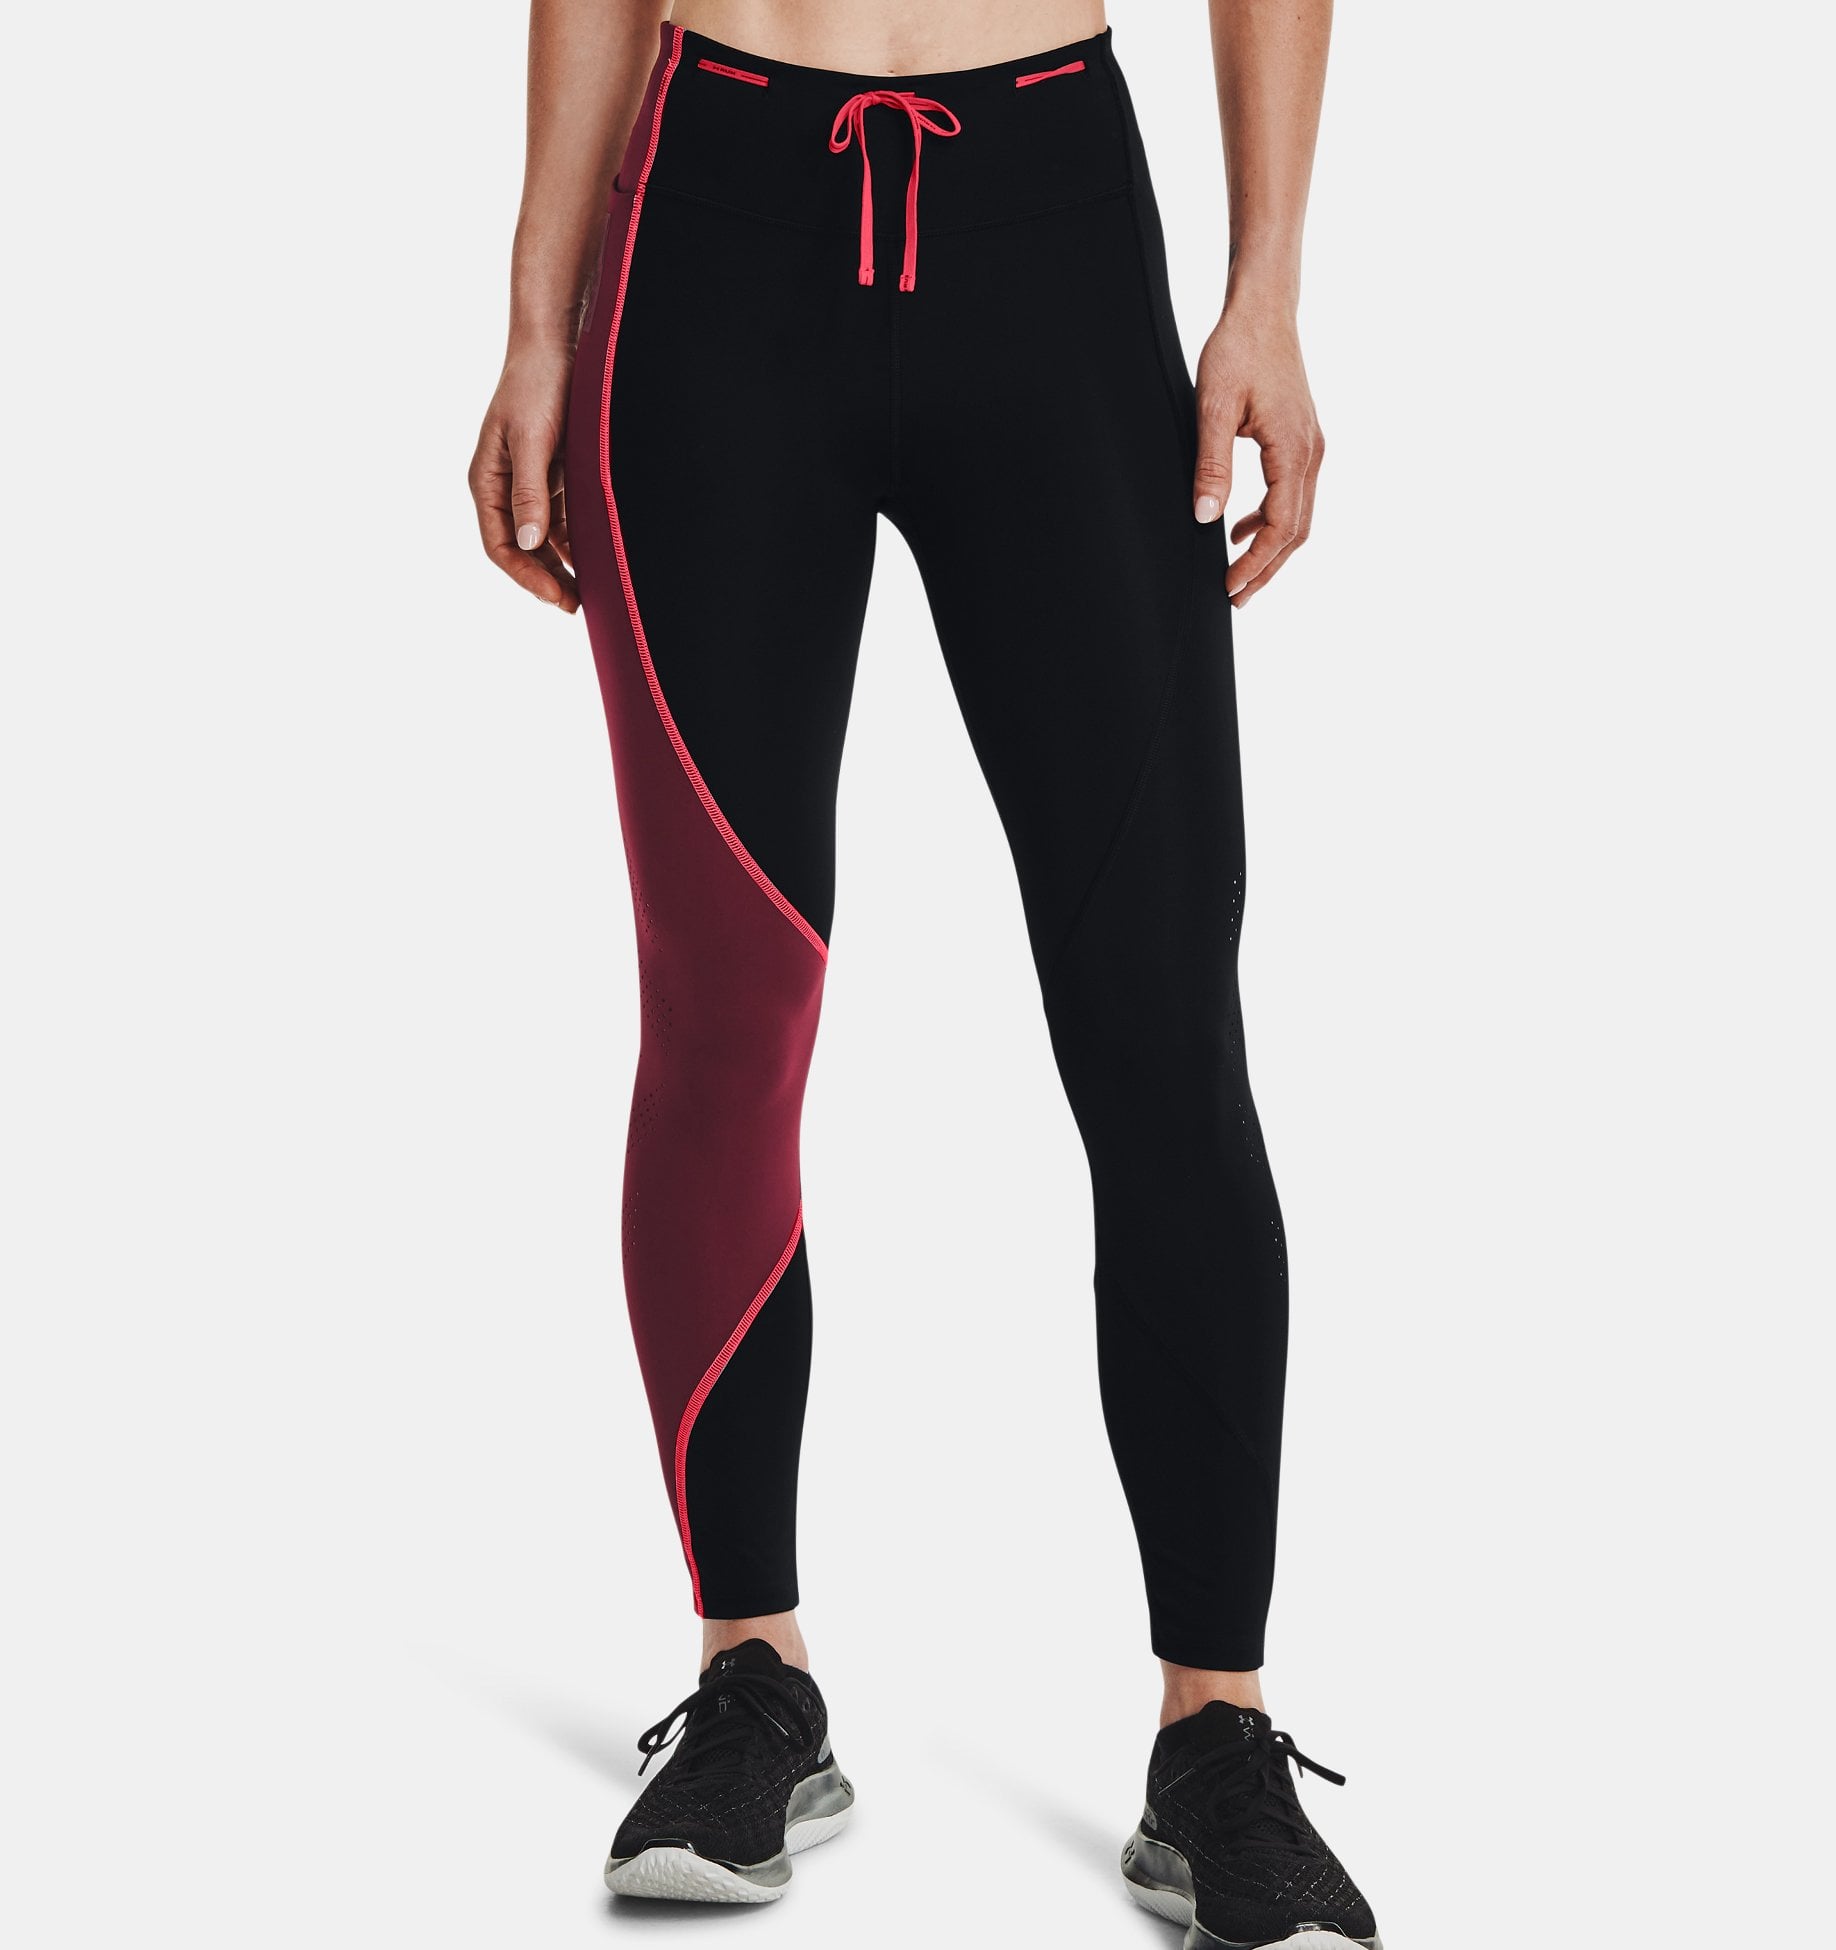 Under Armour Everywhere Tights - Black